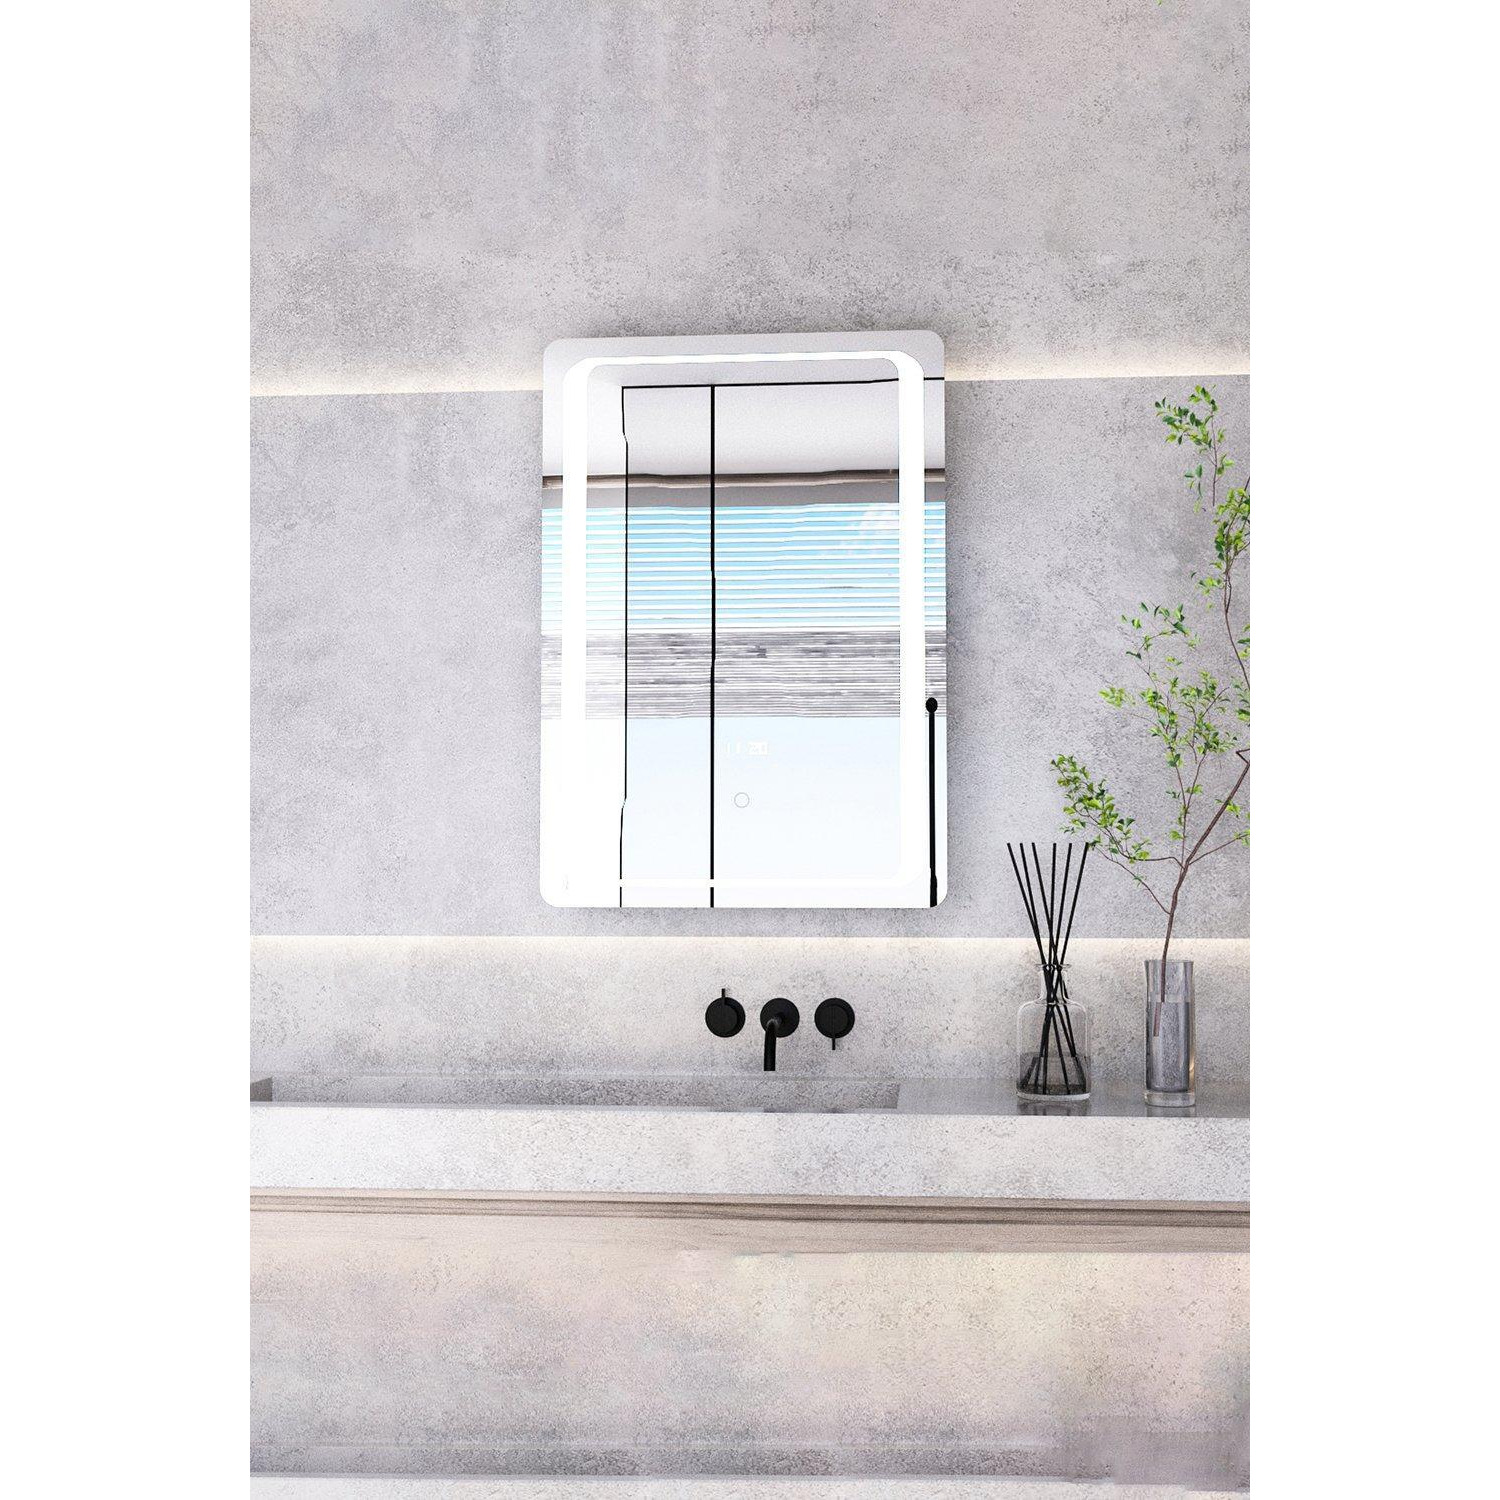 Rectangle Wall Mounted Mirror Cabinet with LED Lighting - image 1